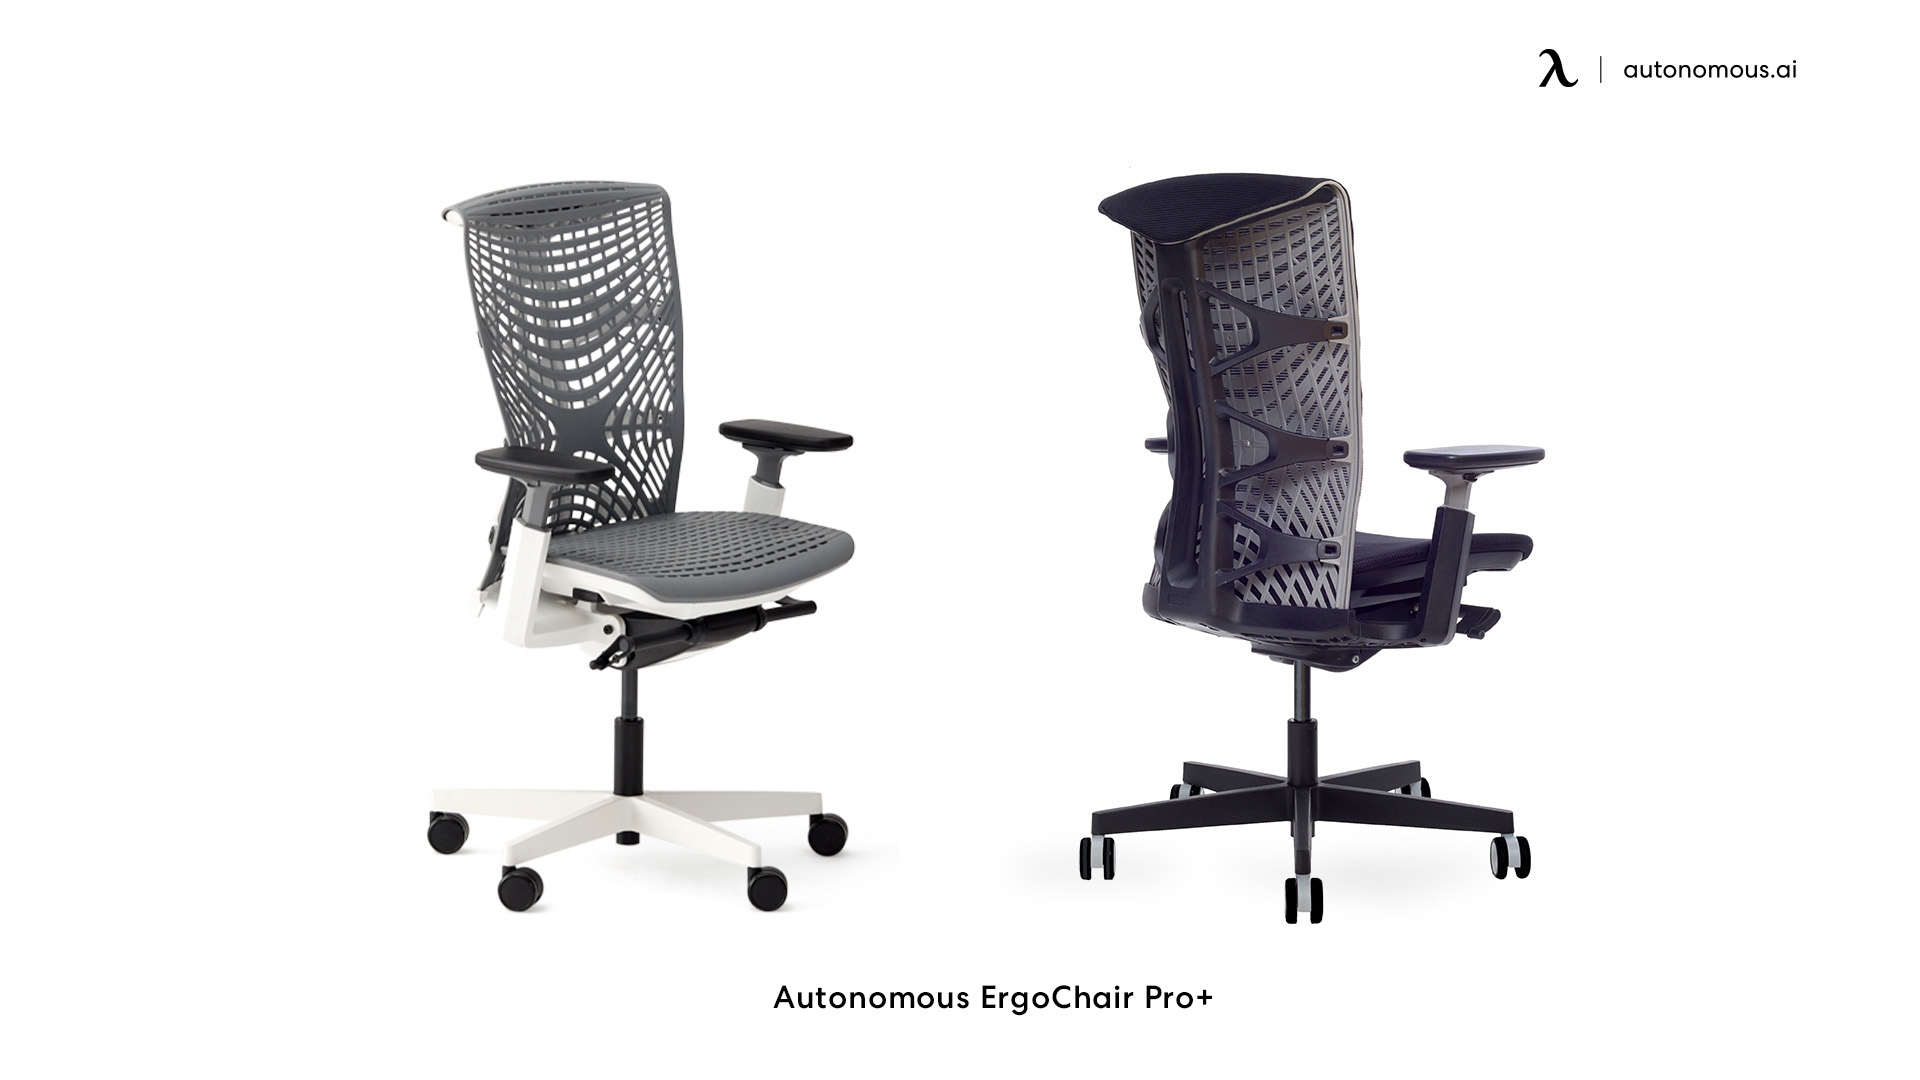 ErgoChair Plus white and grey office chair